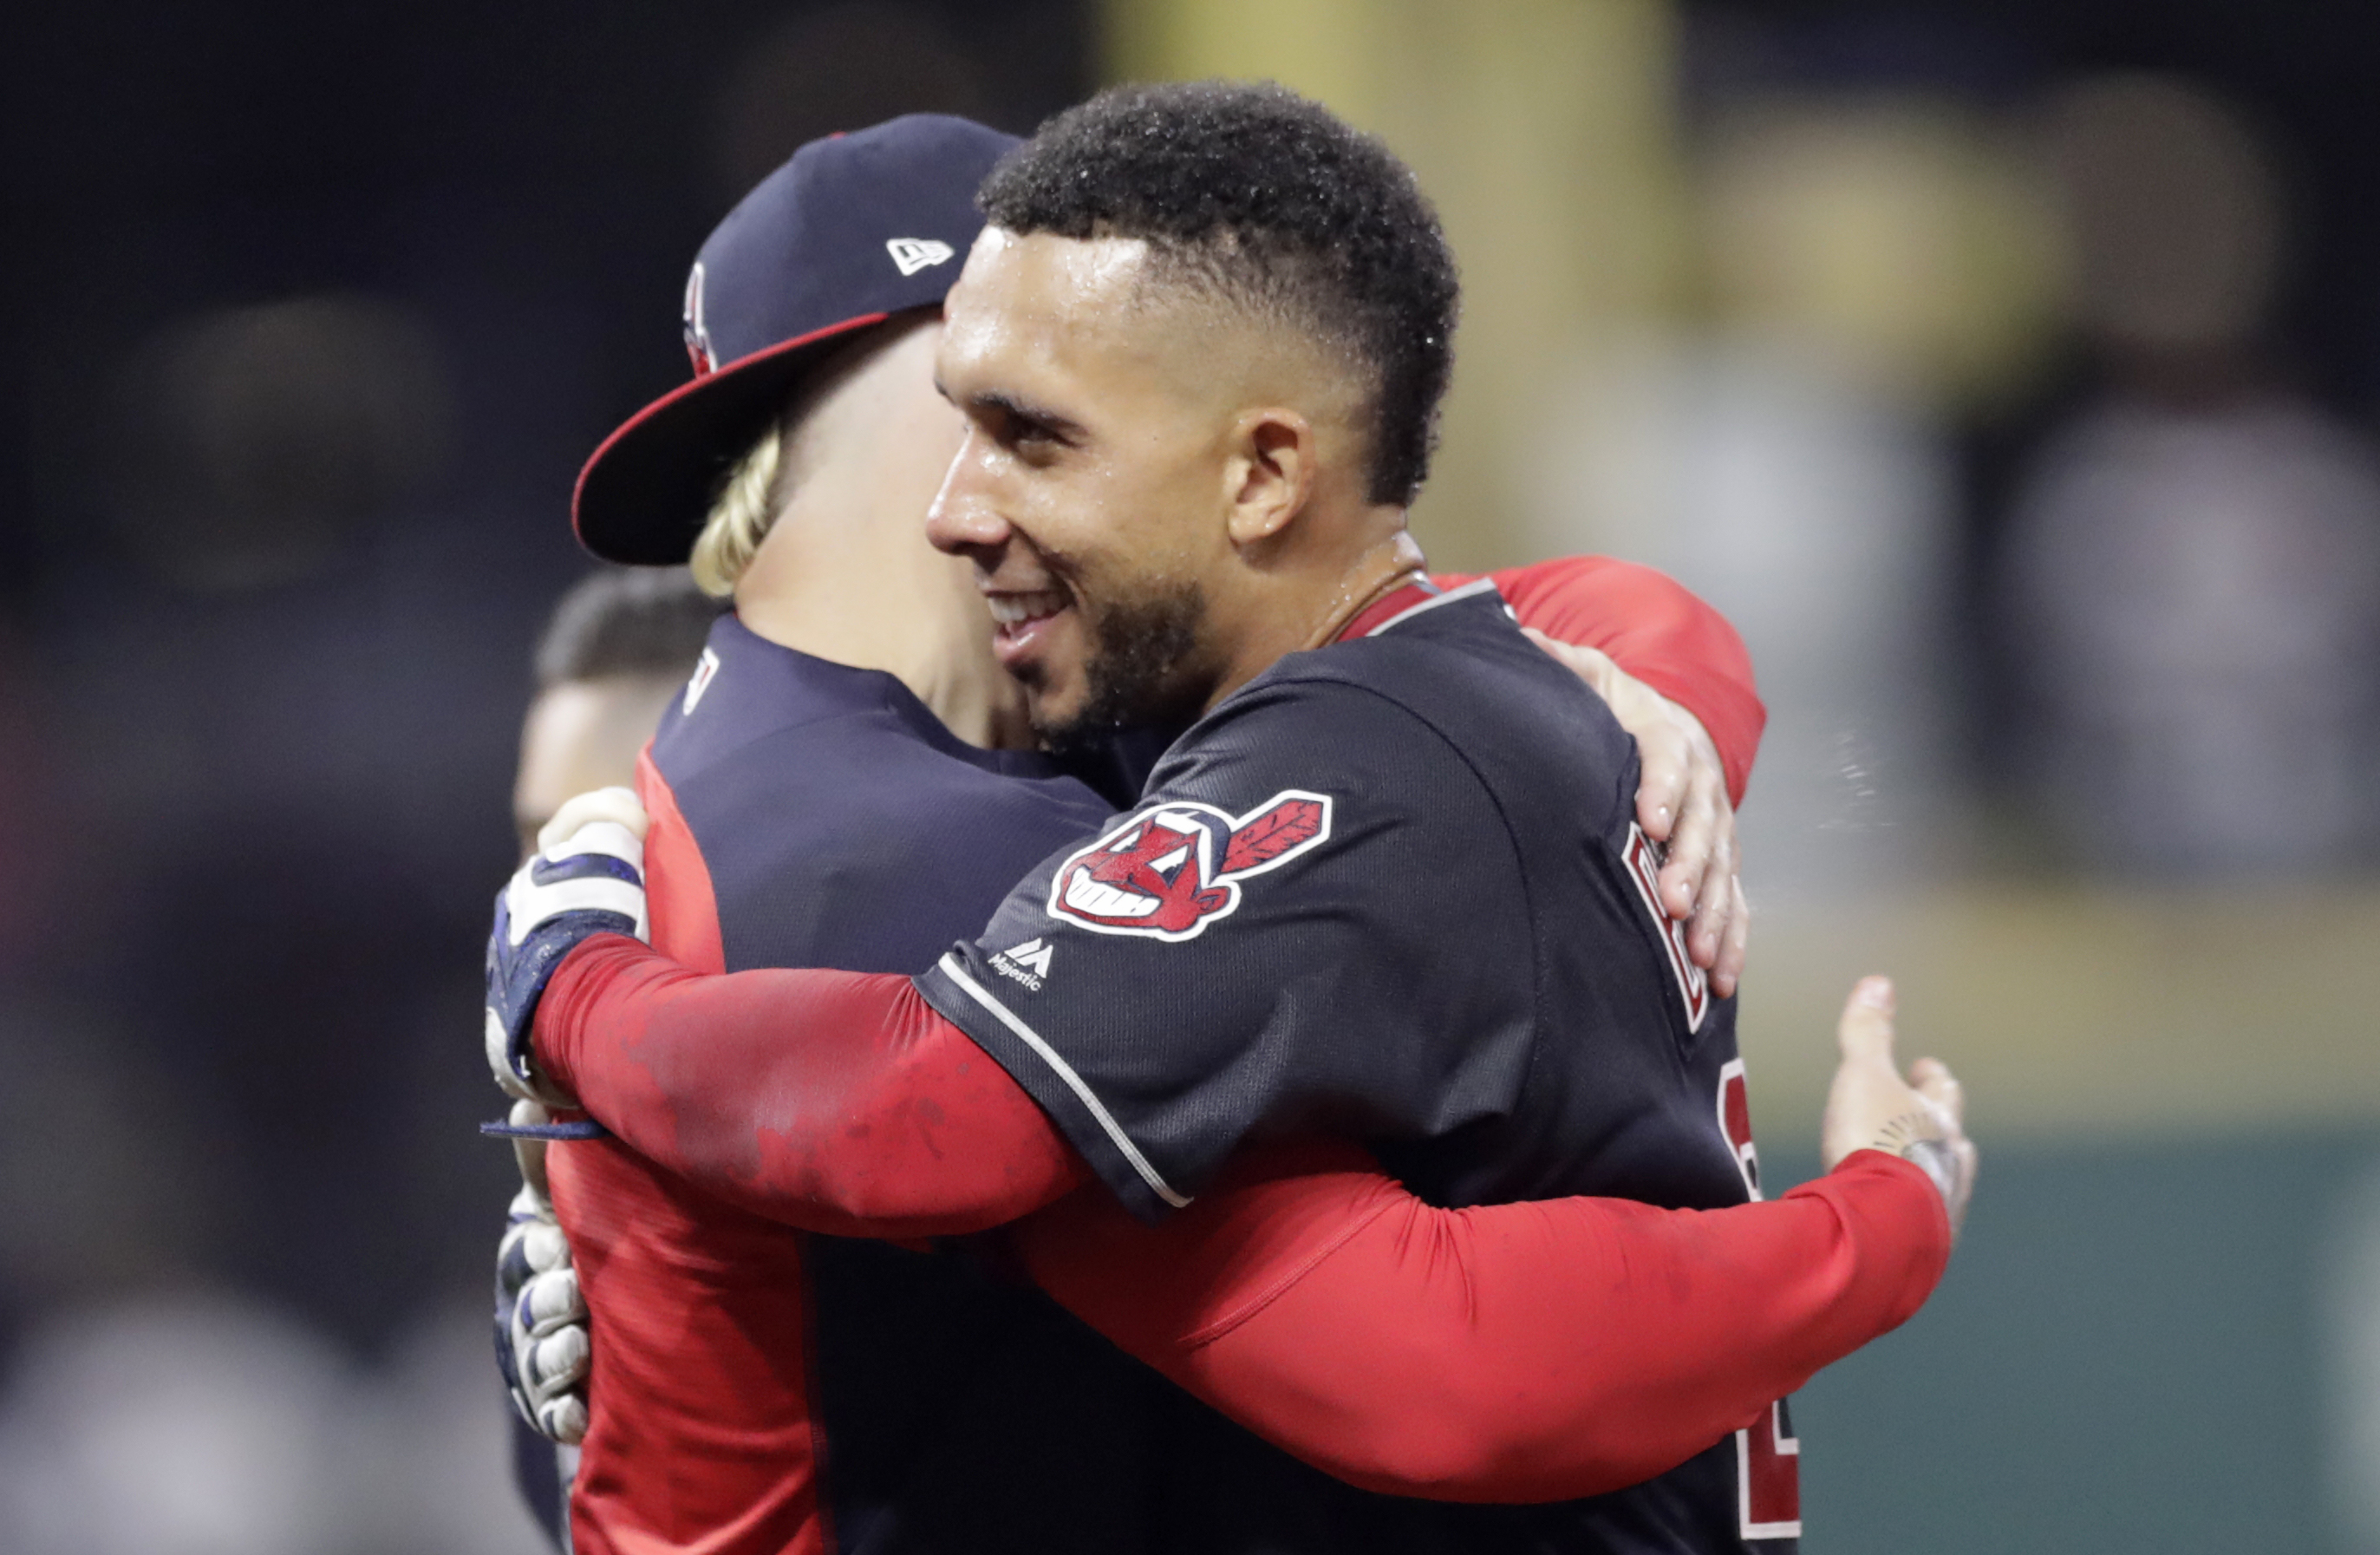 Brantley single in 11th lifts Indians over Red Sox 5-4